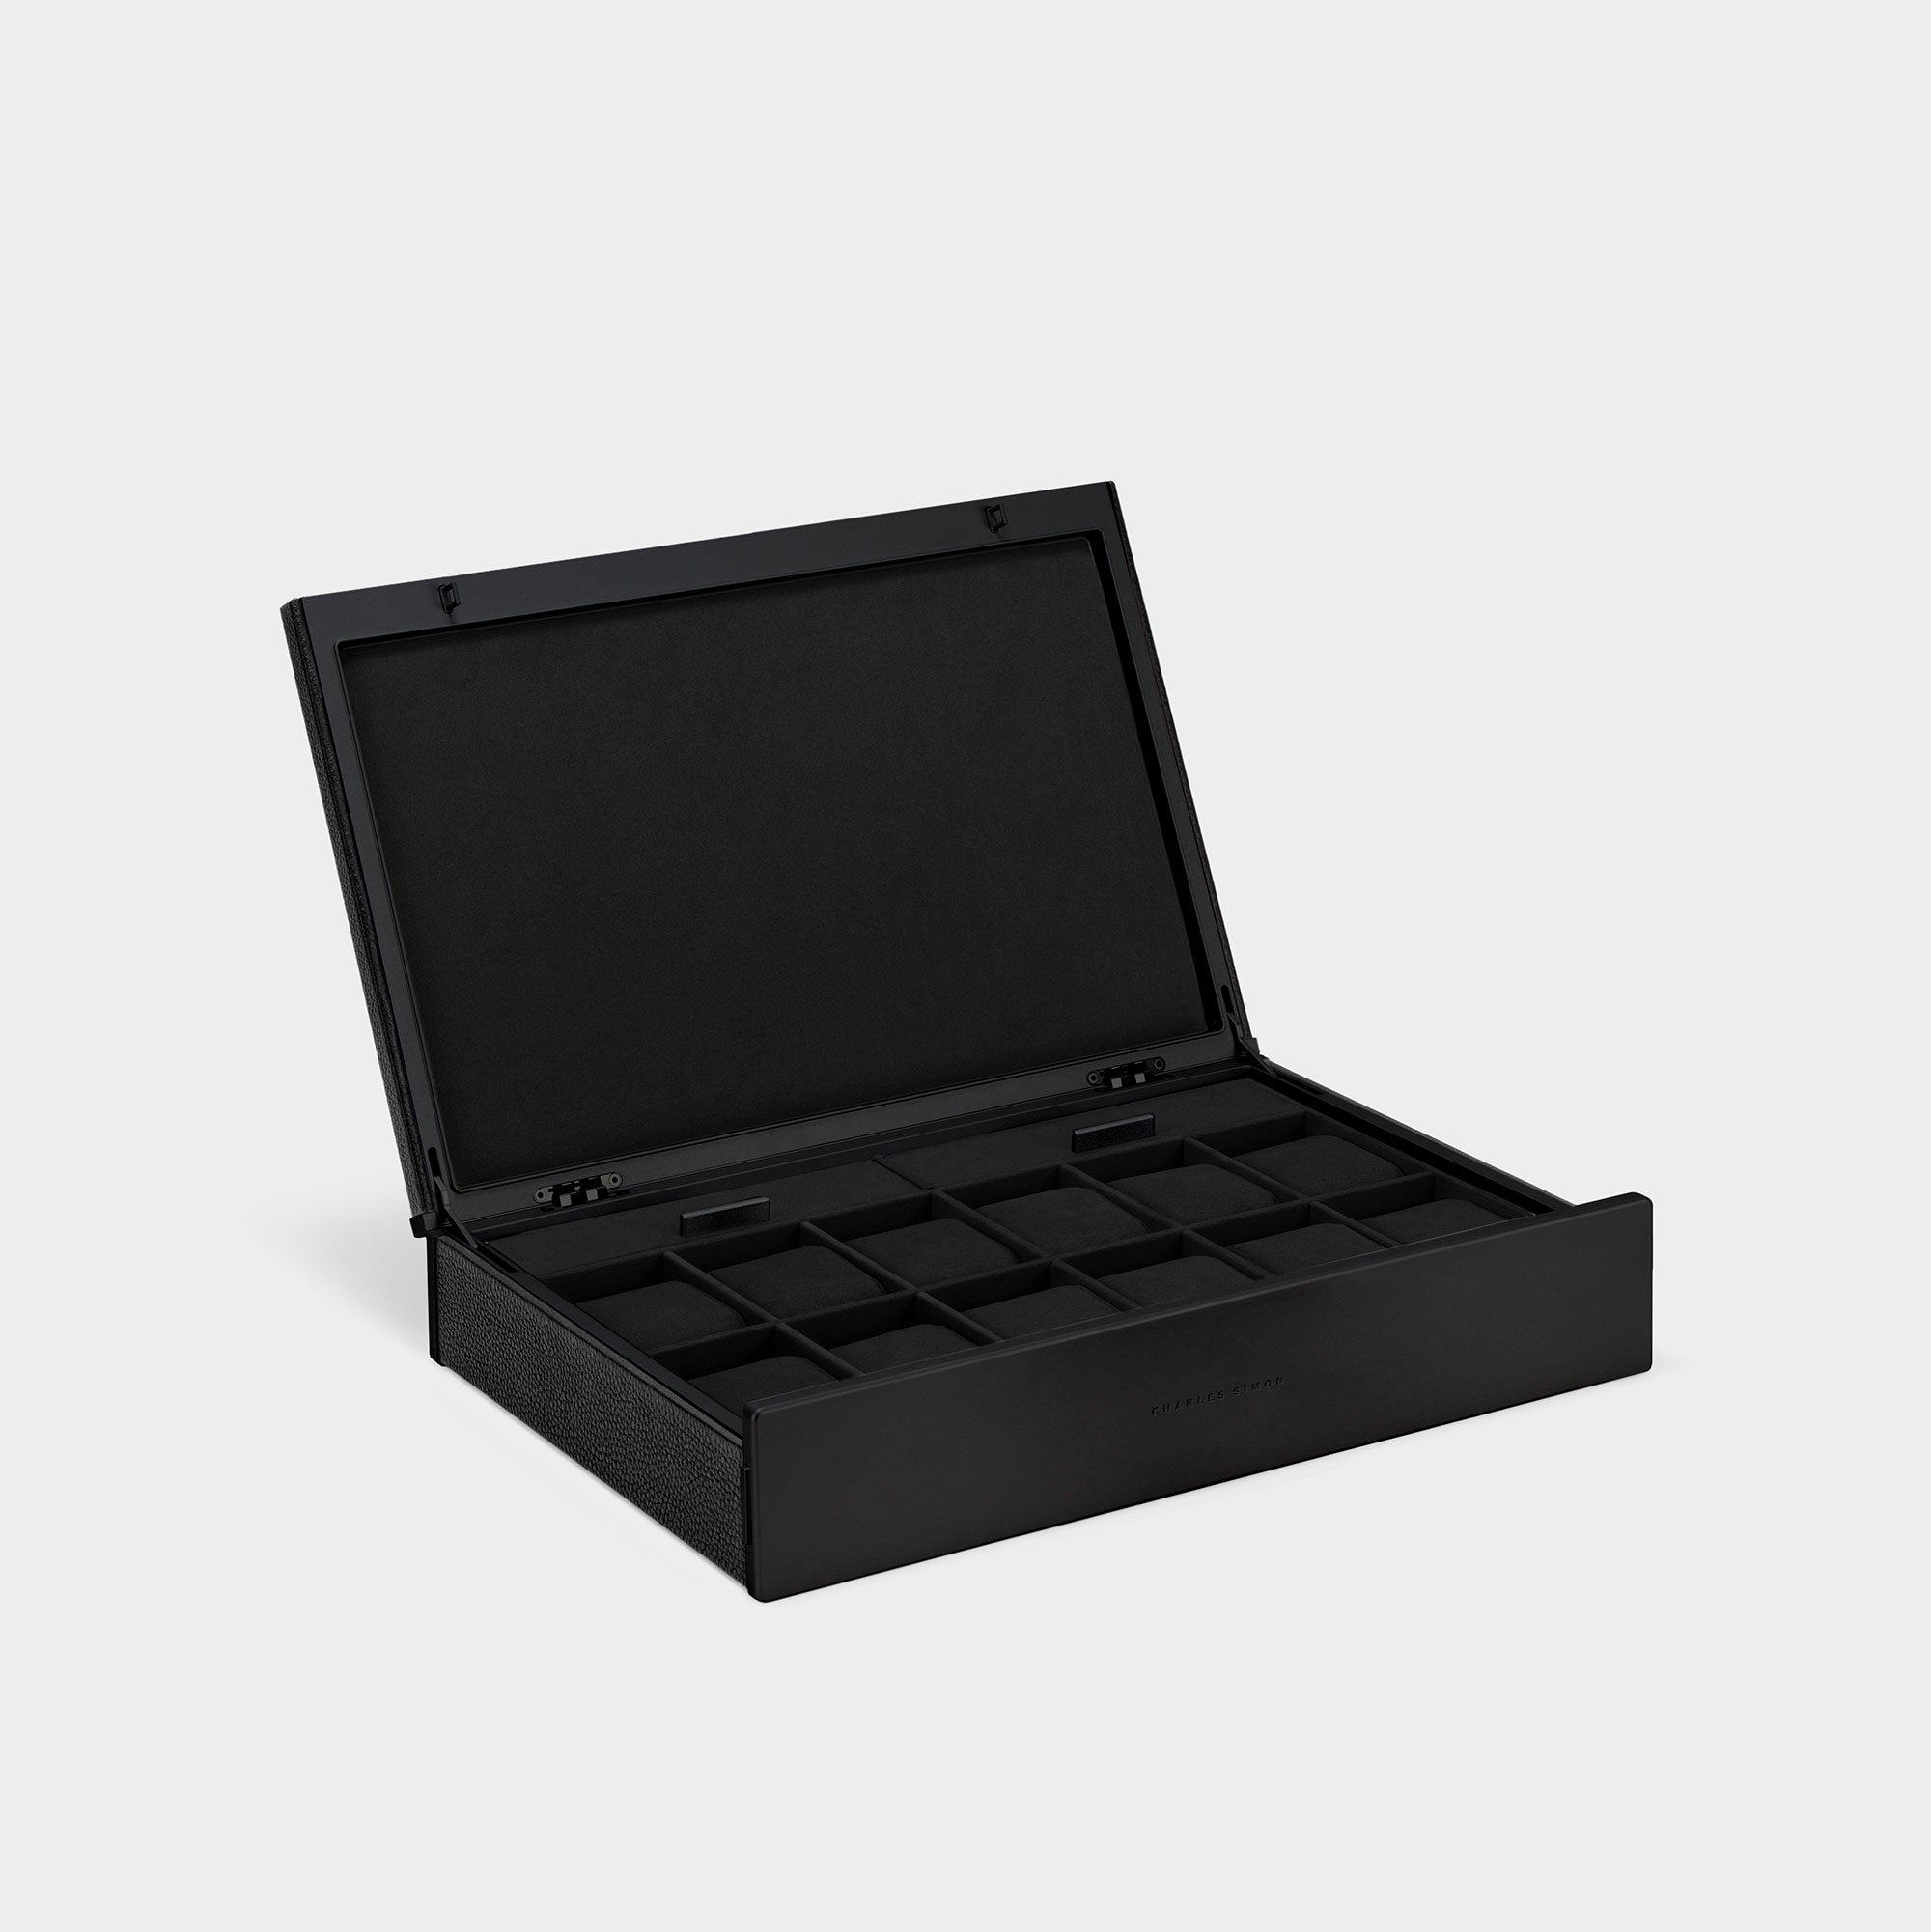 Handmade watch box for 6 watches in all black leather, carbon fiber and anodized aluminum casing and notte Alcantara interior